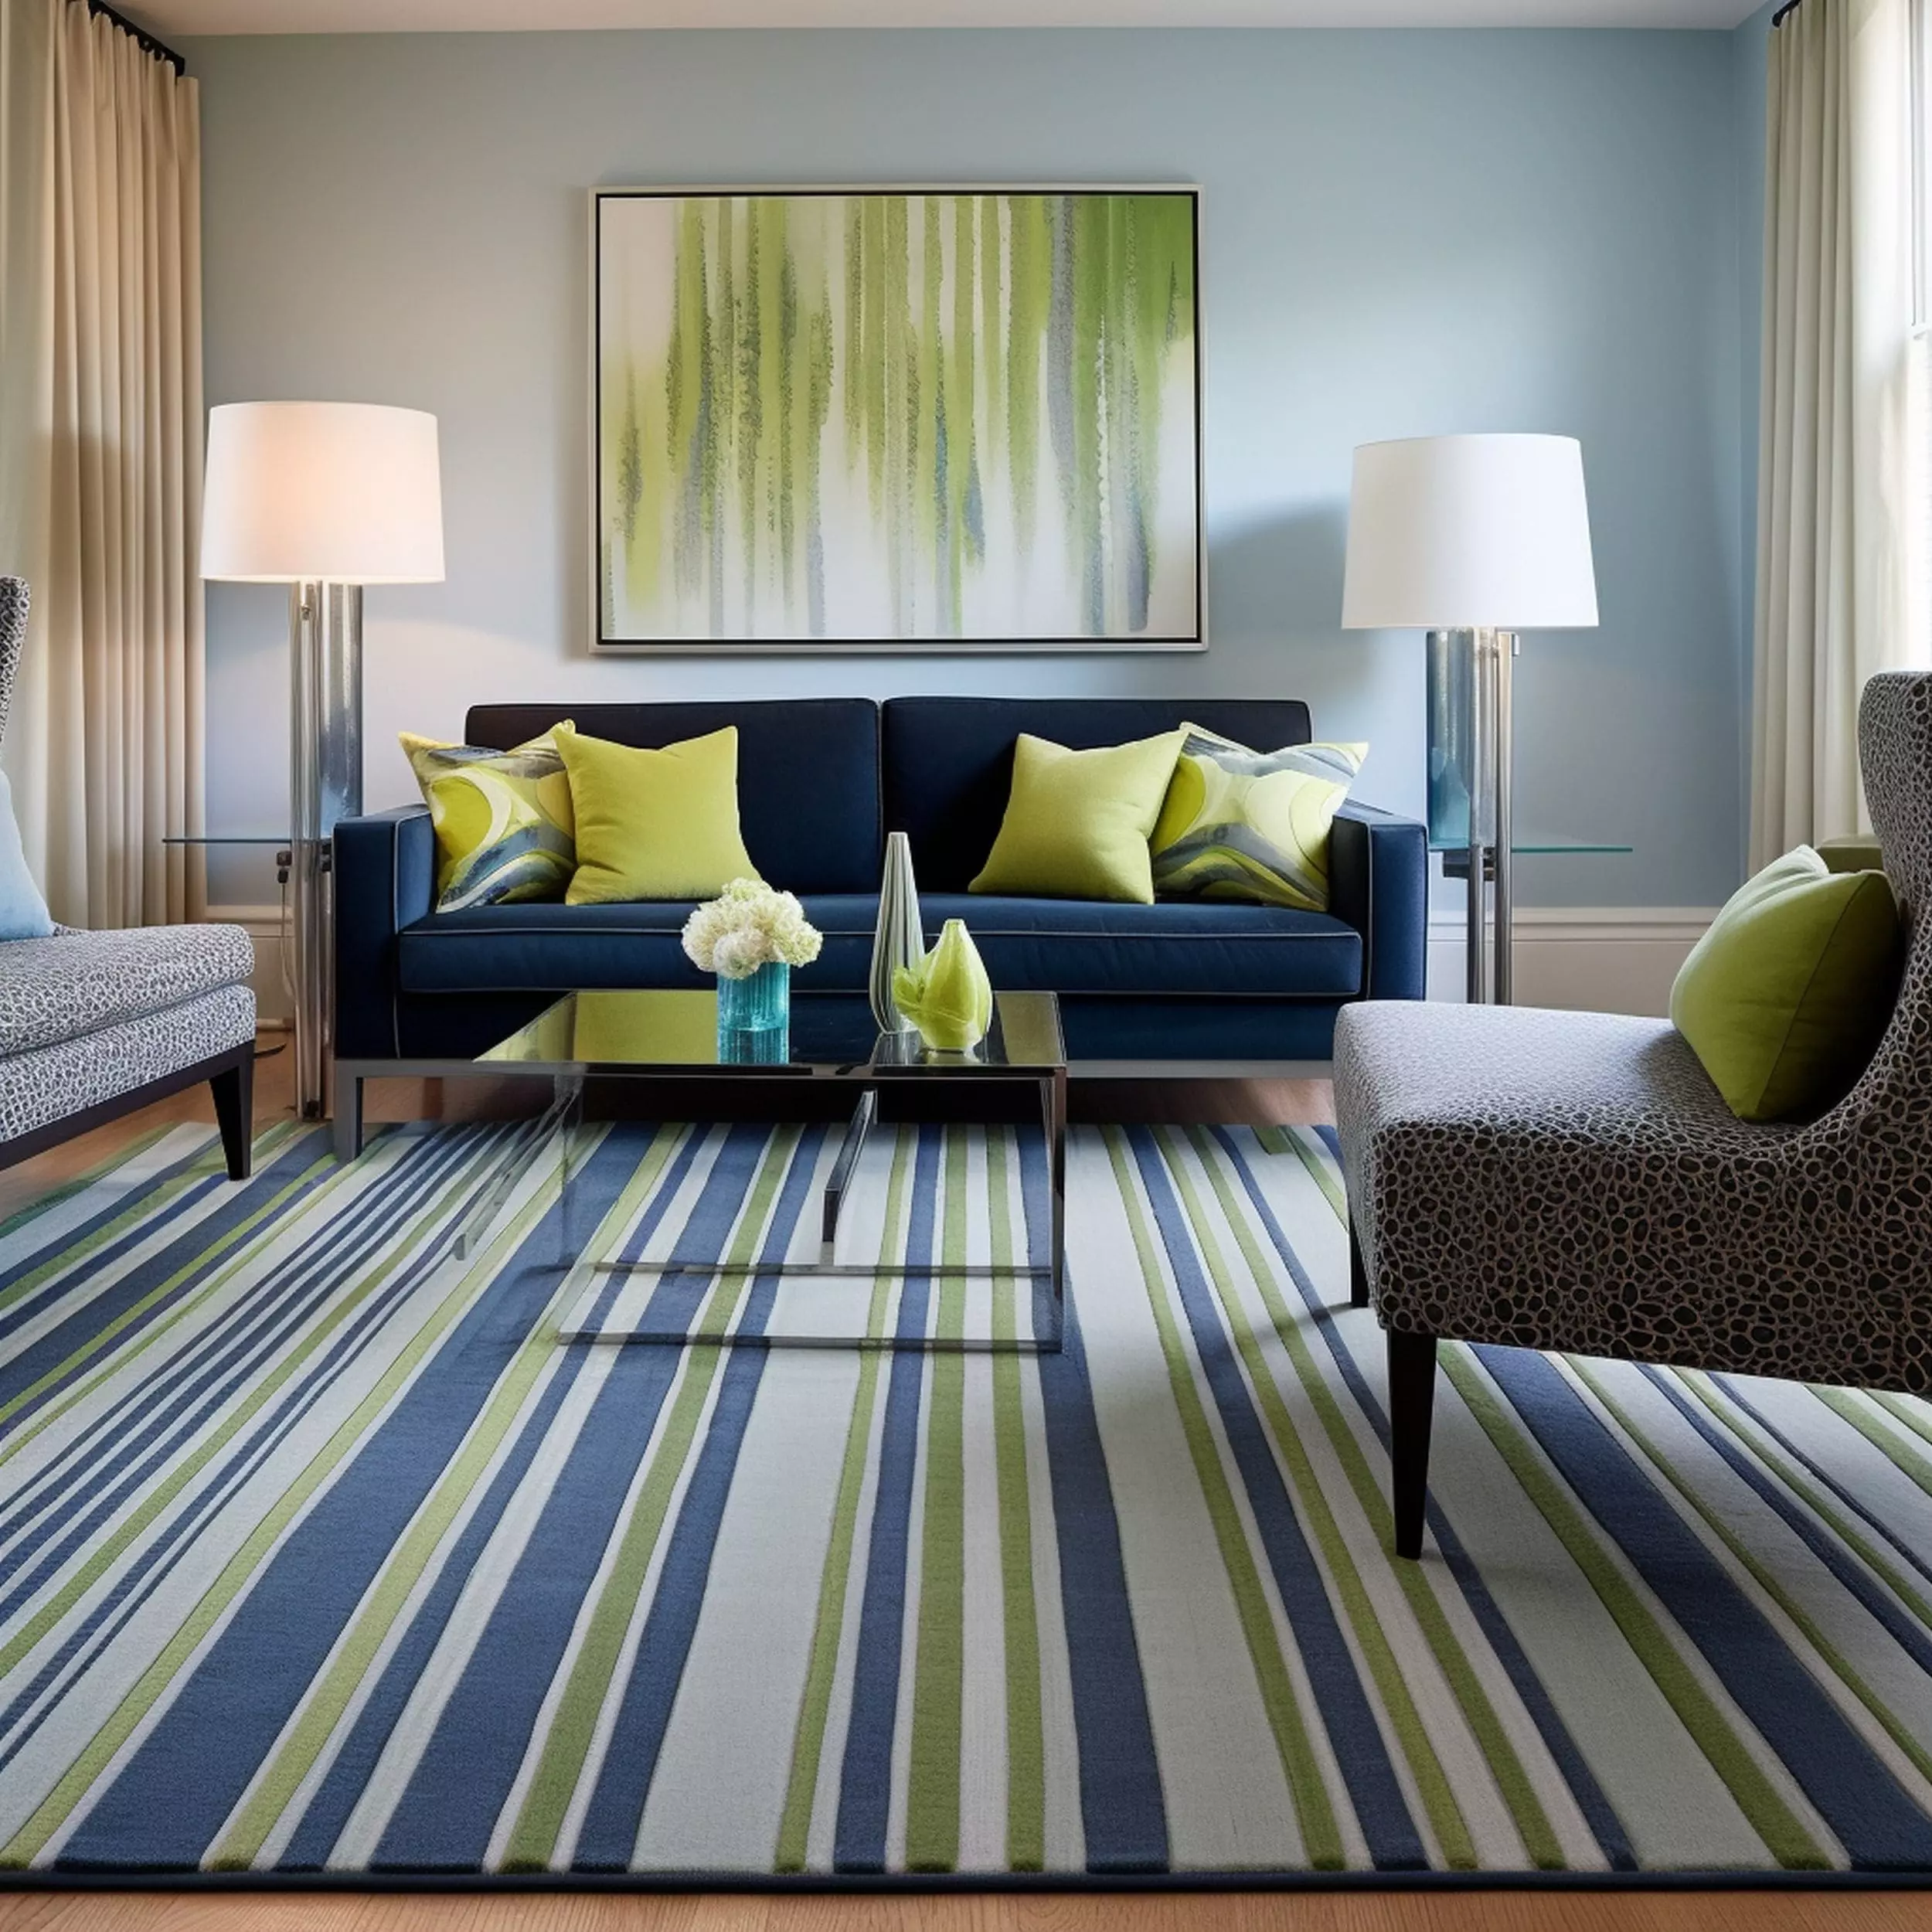 Blue and Green Striped Carpet in Living Room